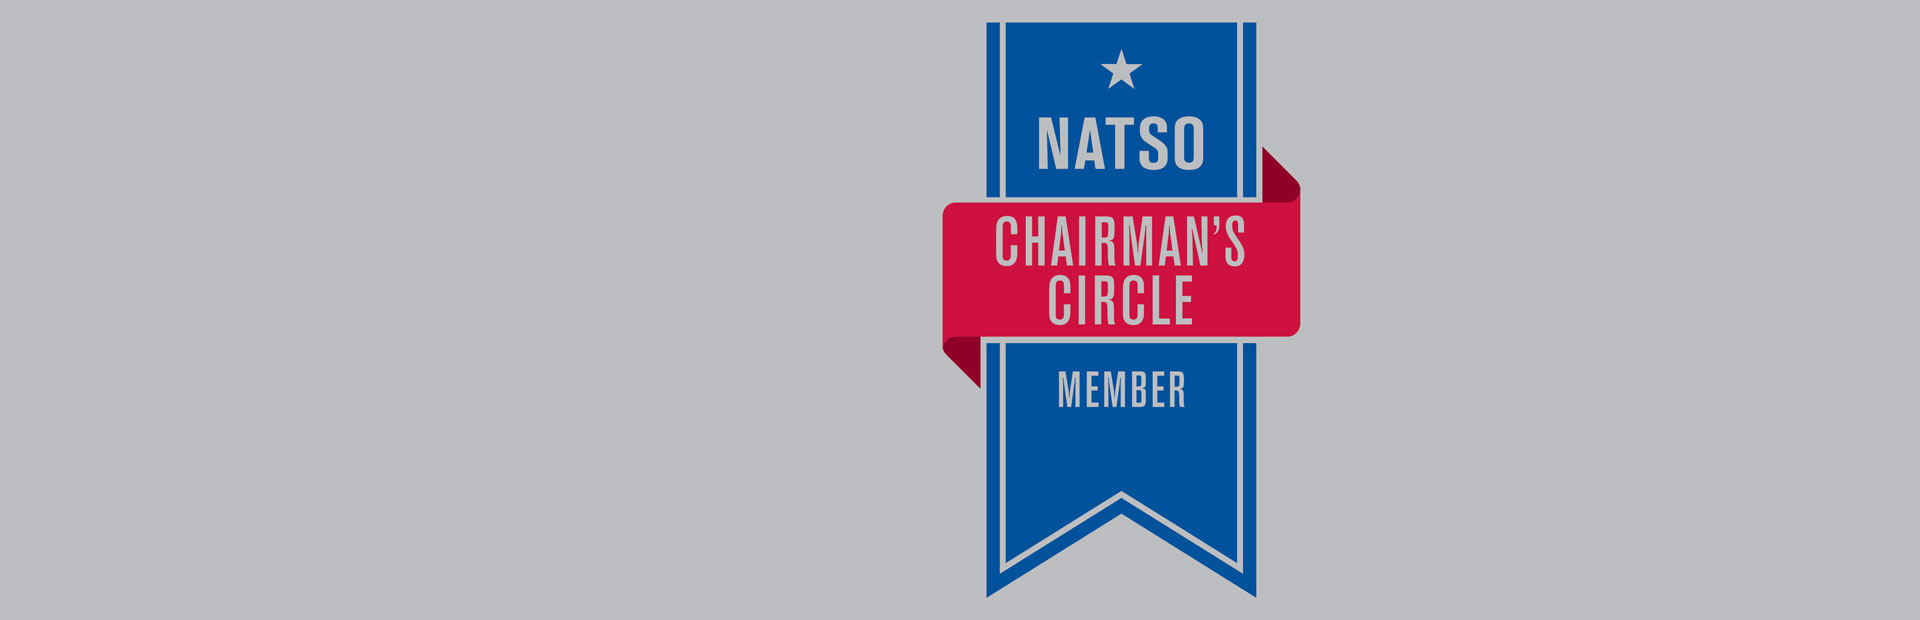 NATSO Supplier Partners Offer COVID-19 Resources